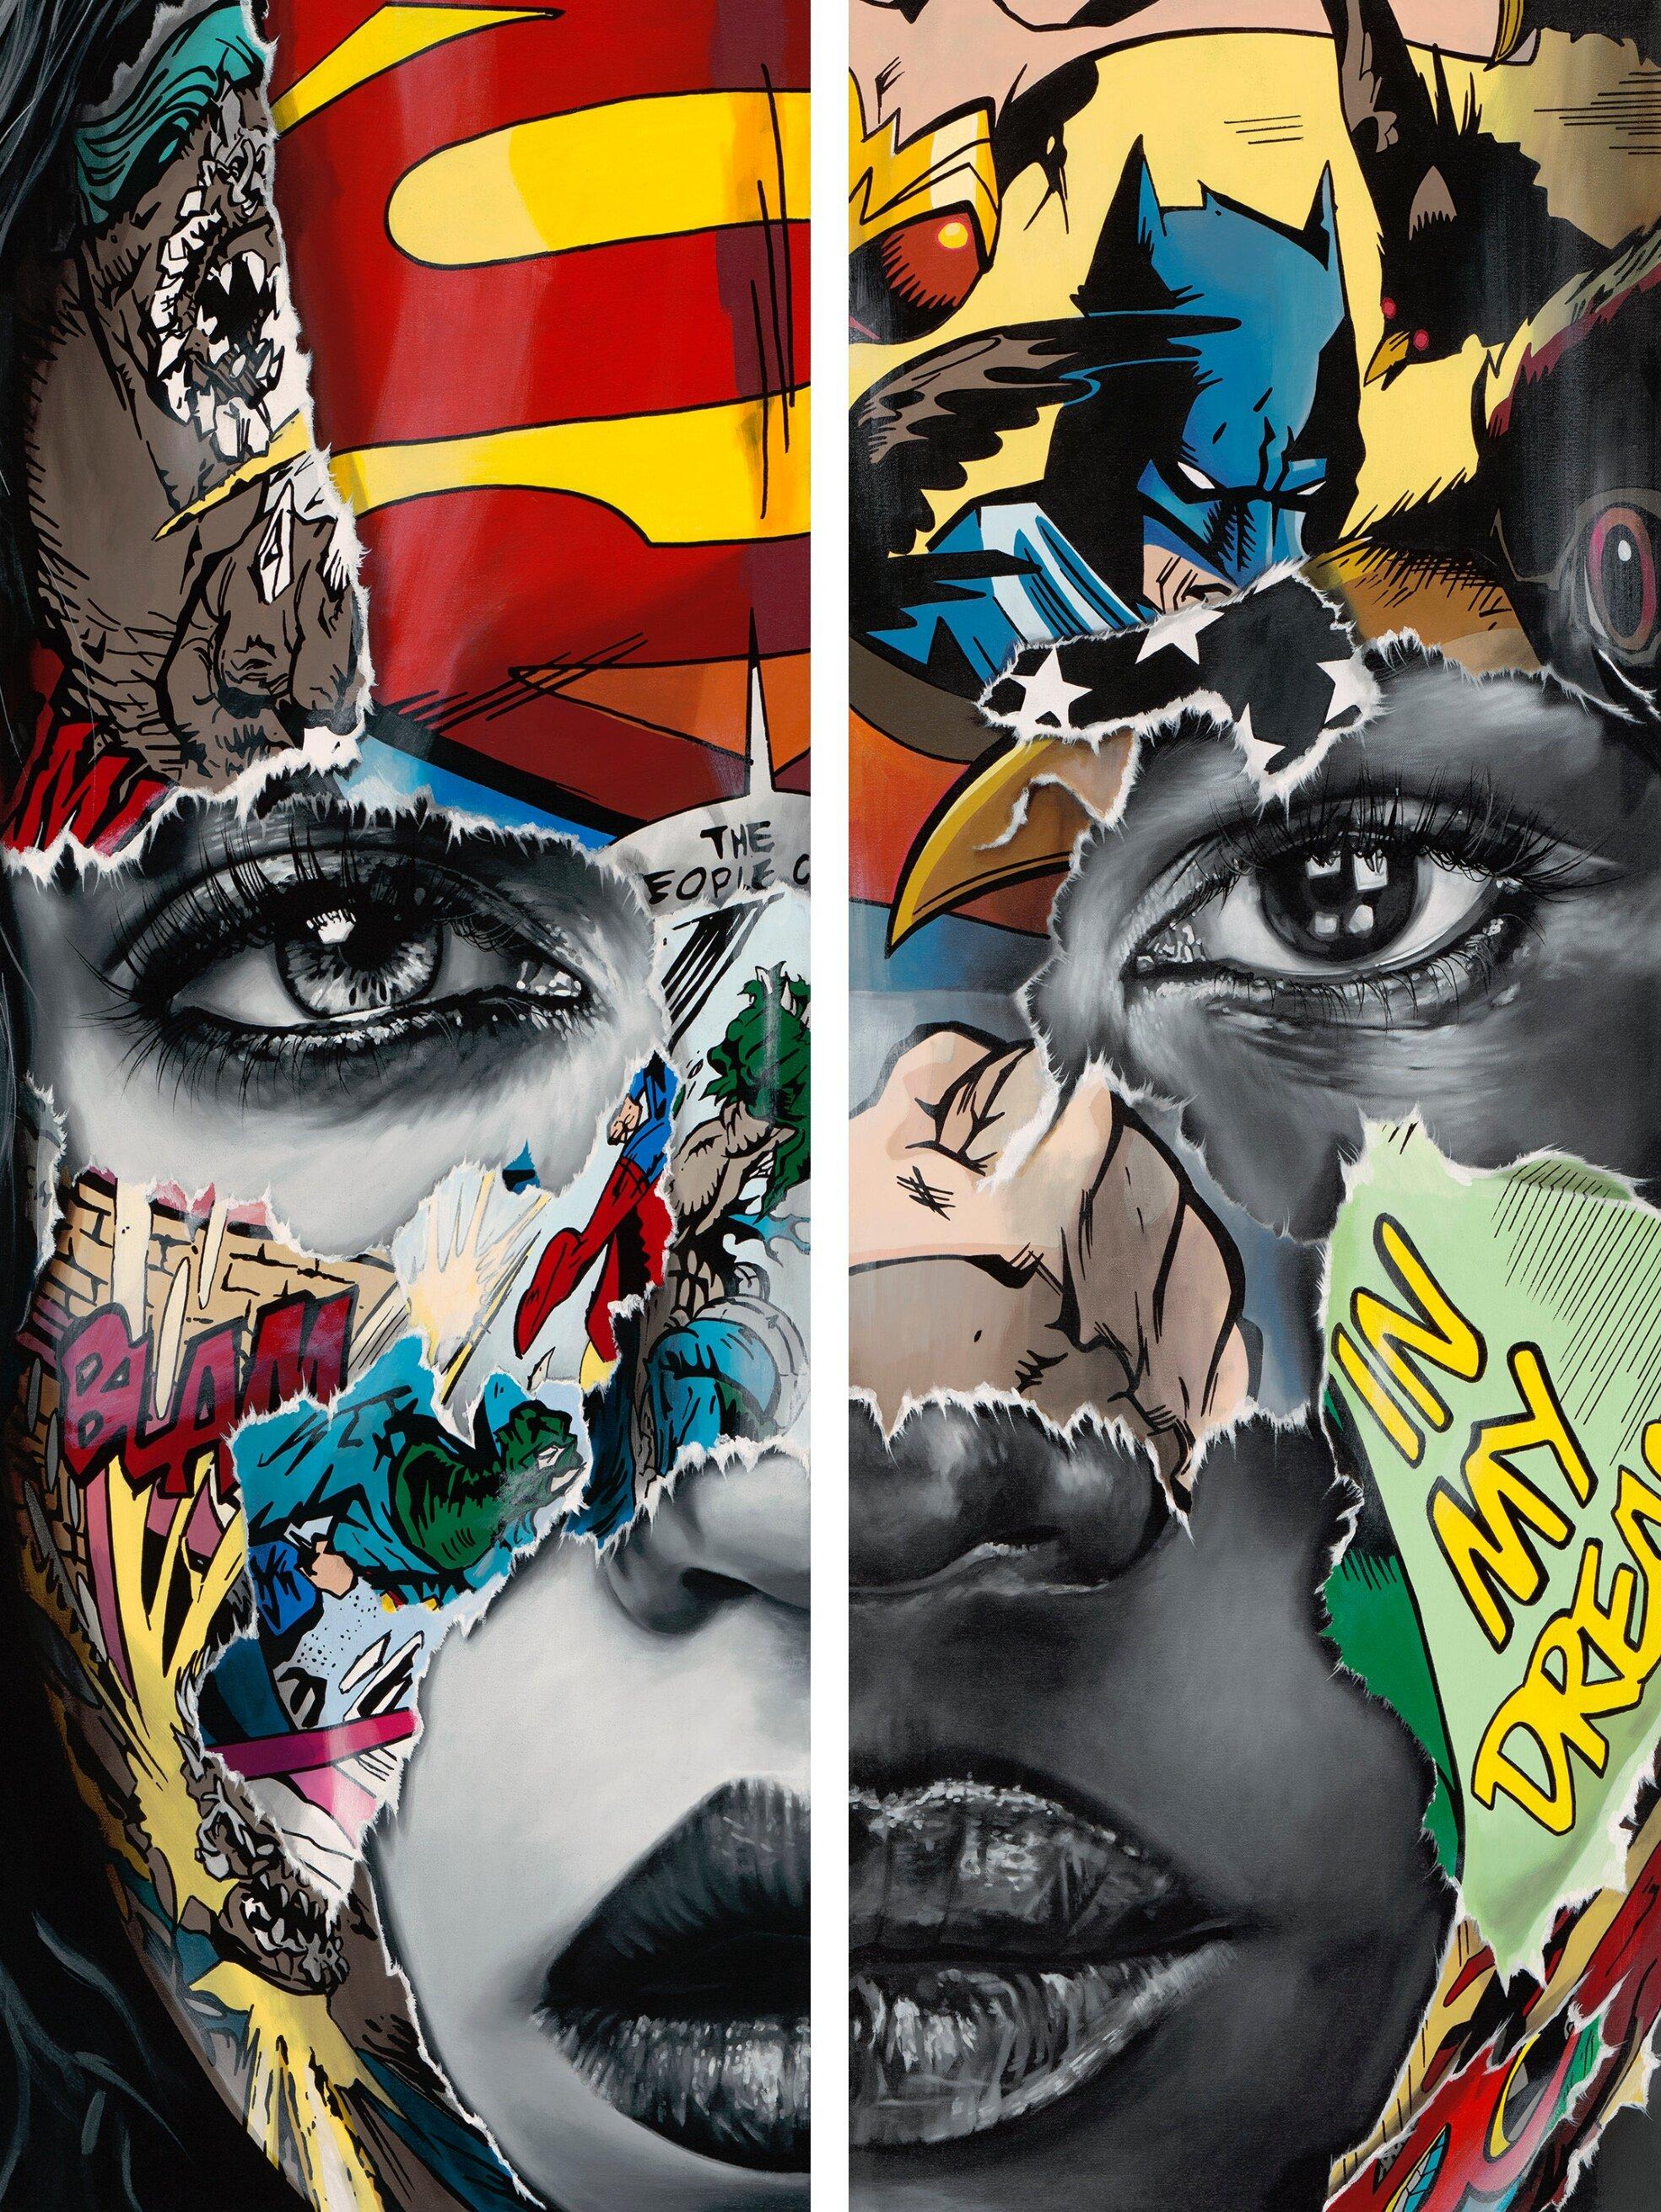 Sandra Chevrier Figurative Print - La Cage, Nous Sommes Uns (We Are One) Signed and Numbered Diptych Matching Print